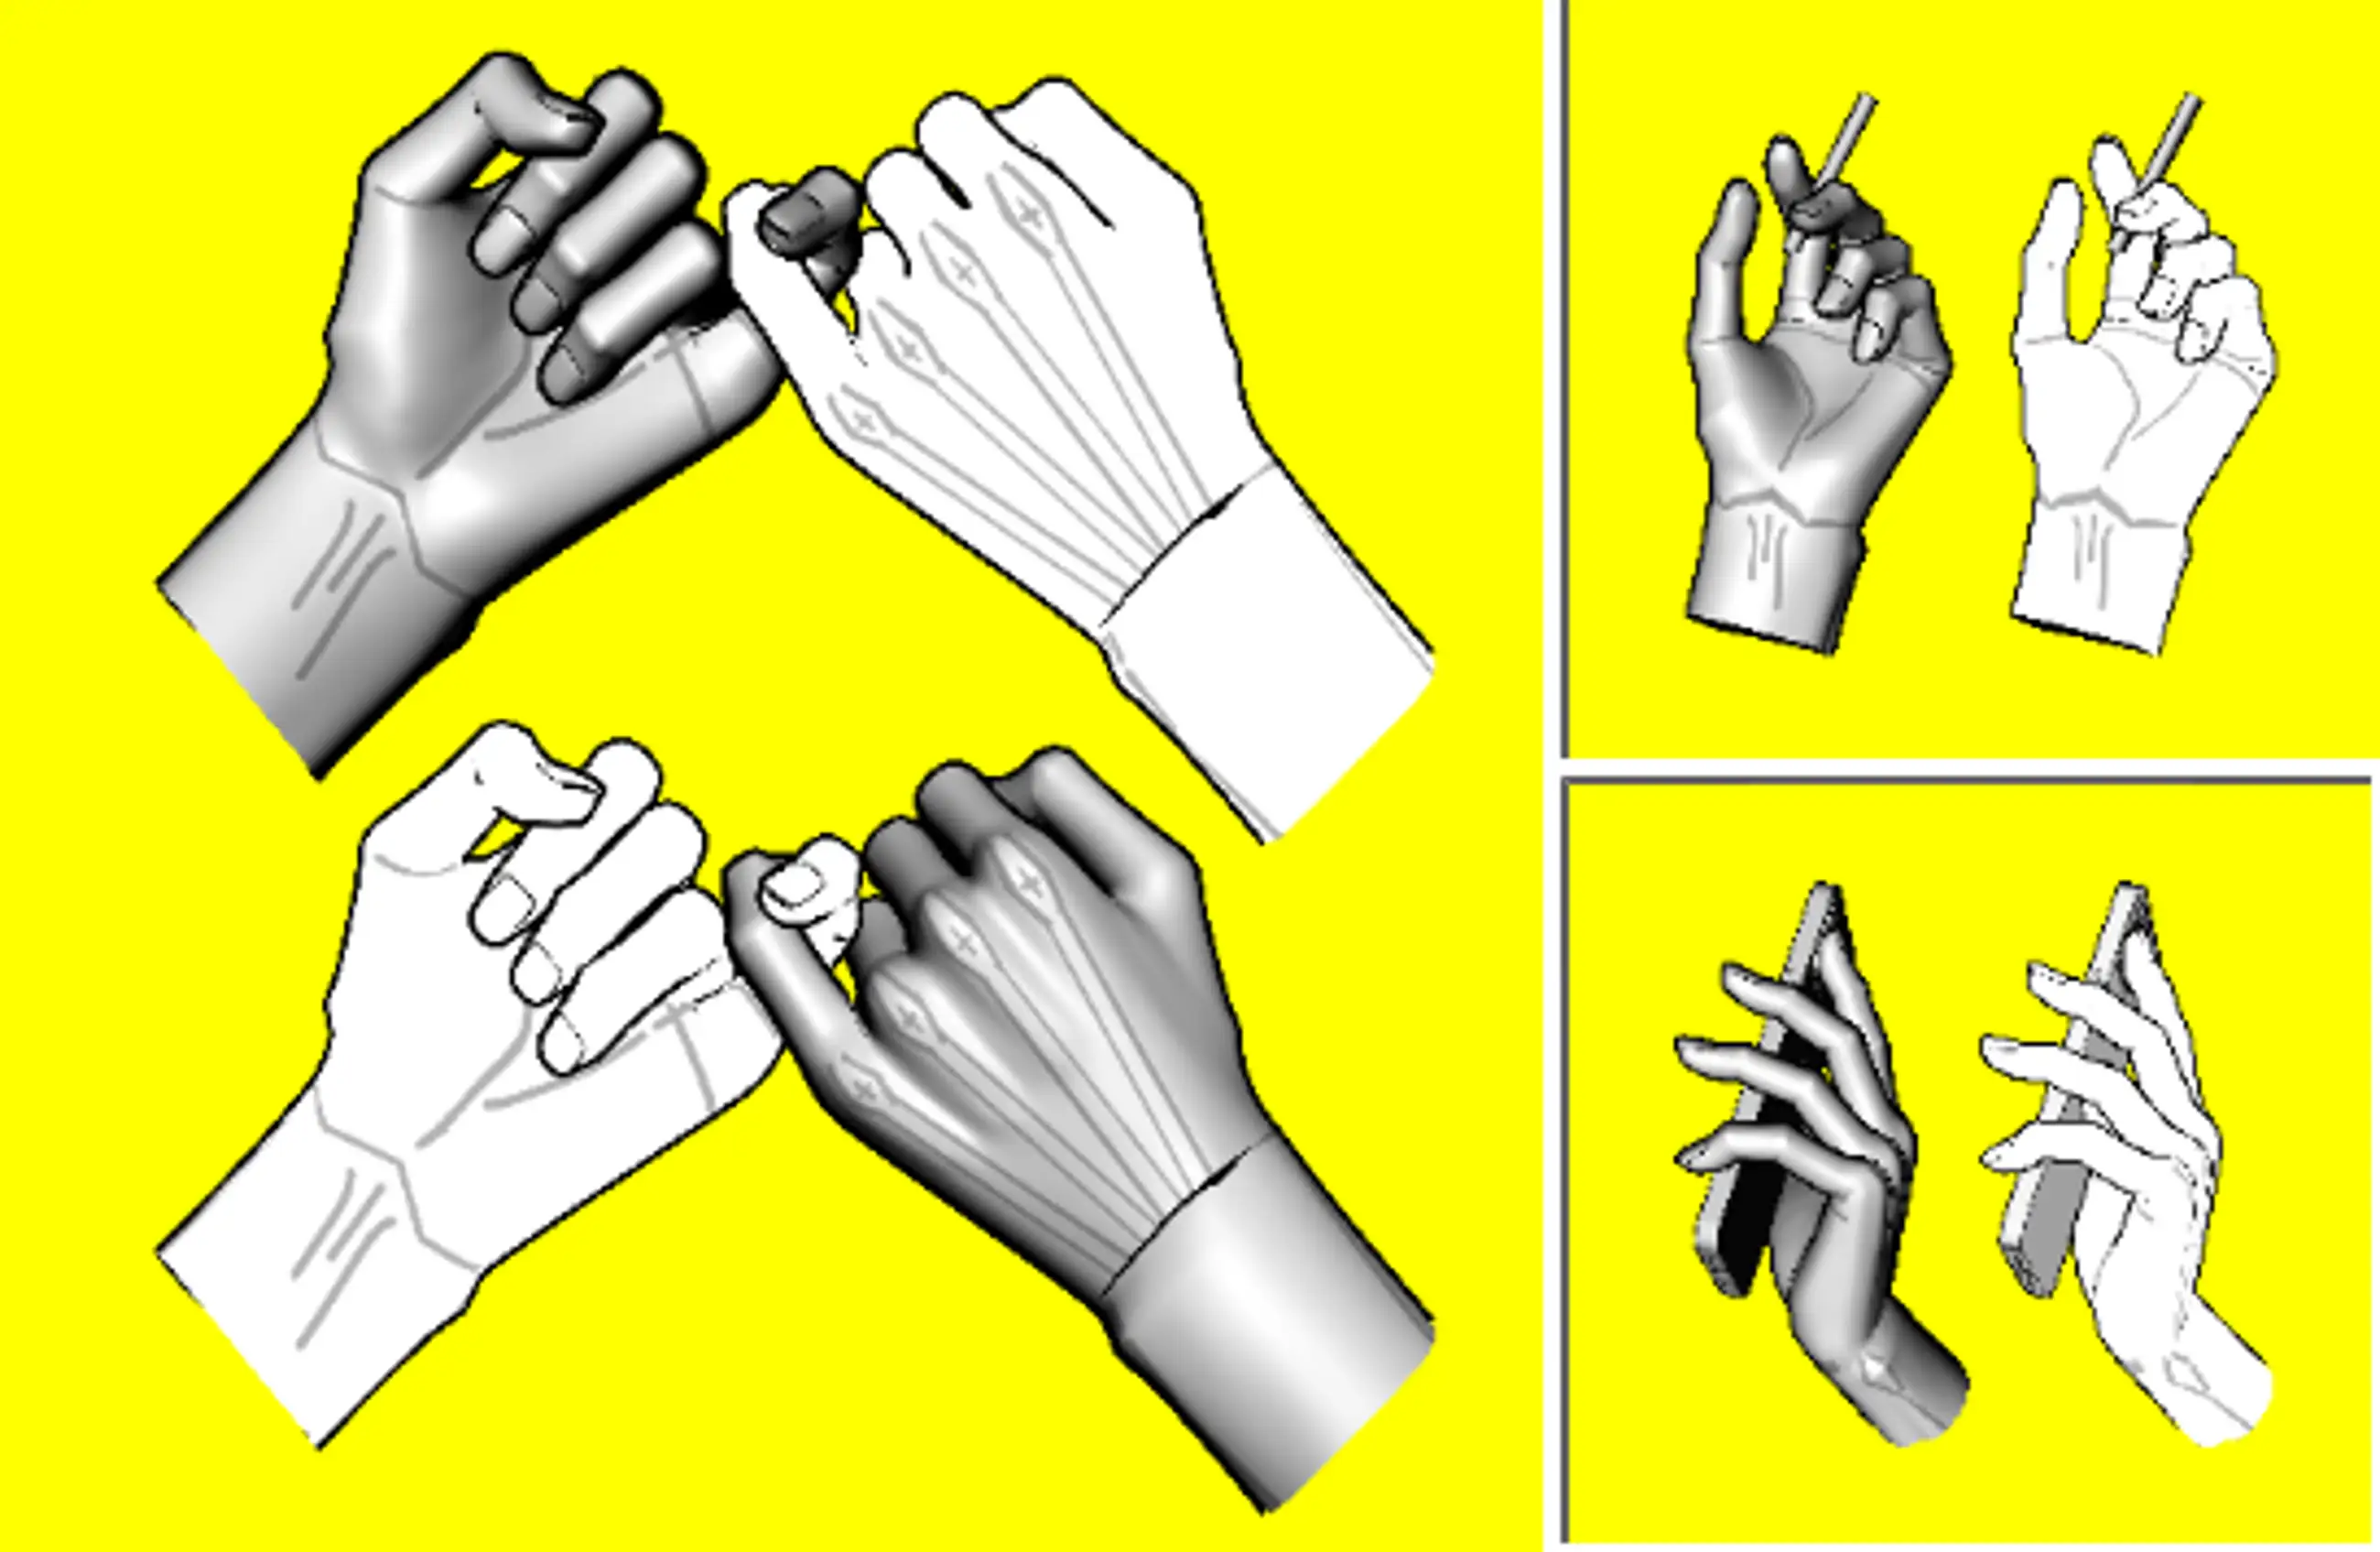 Directly moving Deforme 3D hand pose collection tools and props